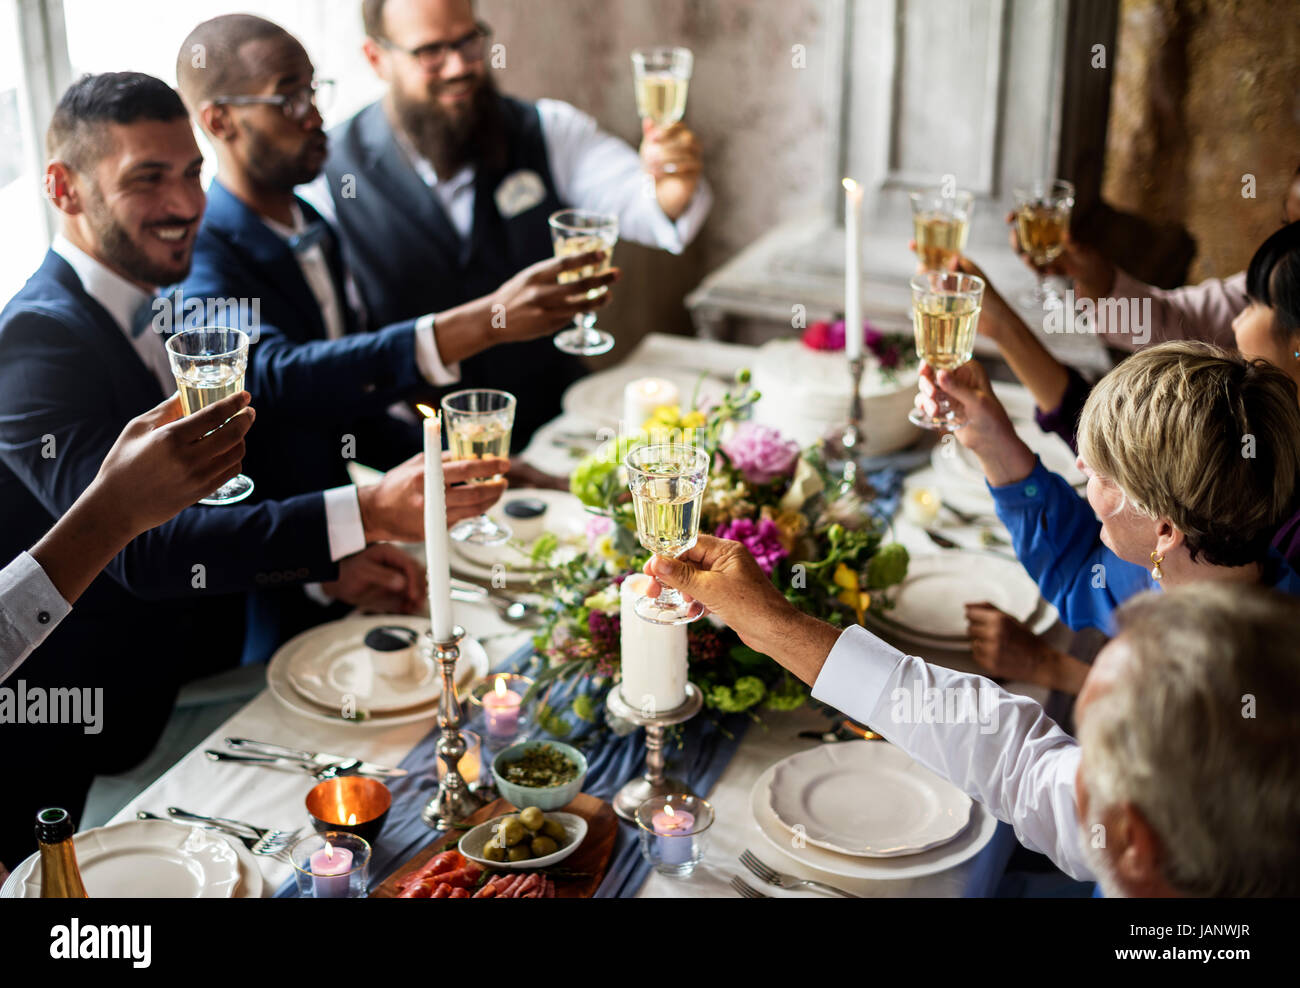 Group of Diverse People Clinking Wine Glasses Together Stock Photo